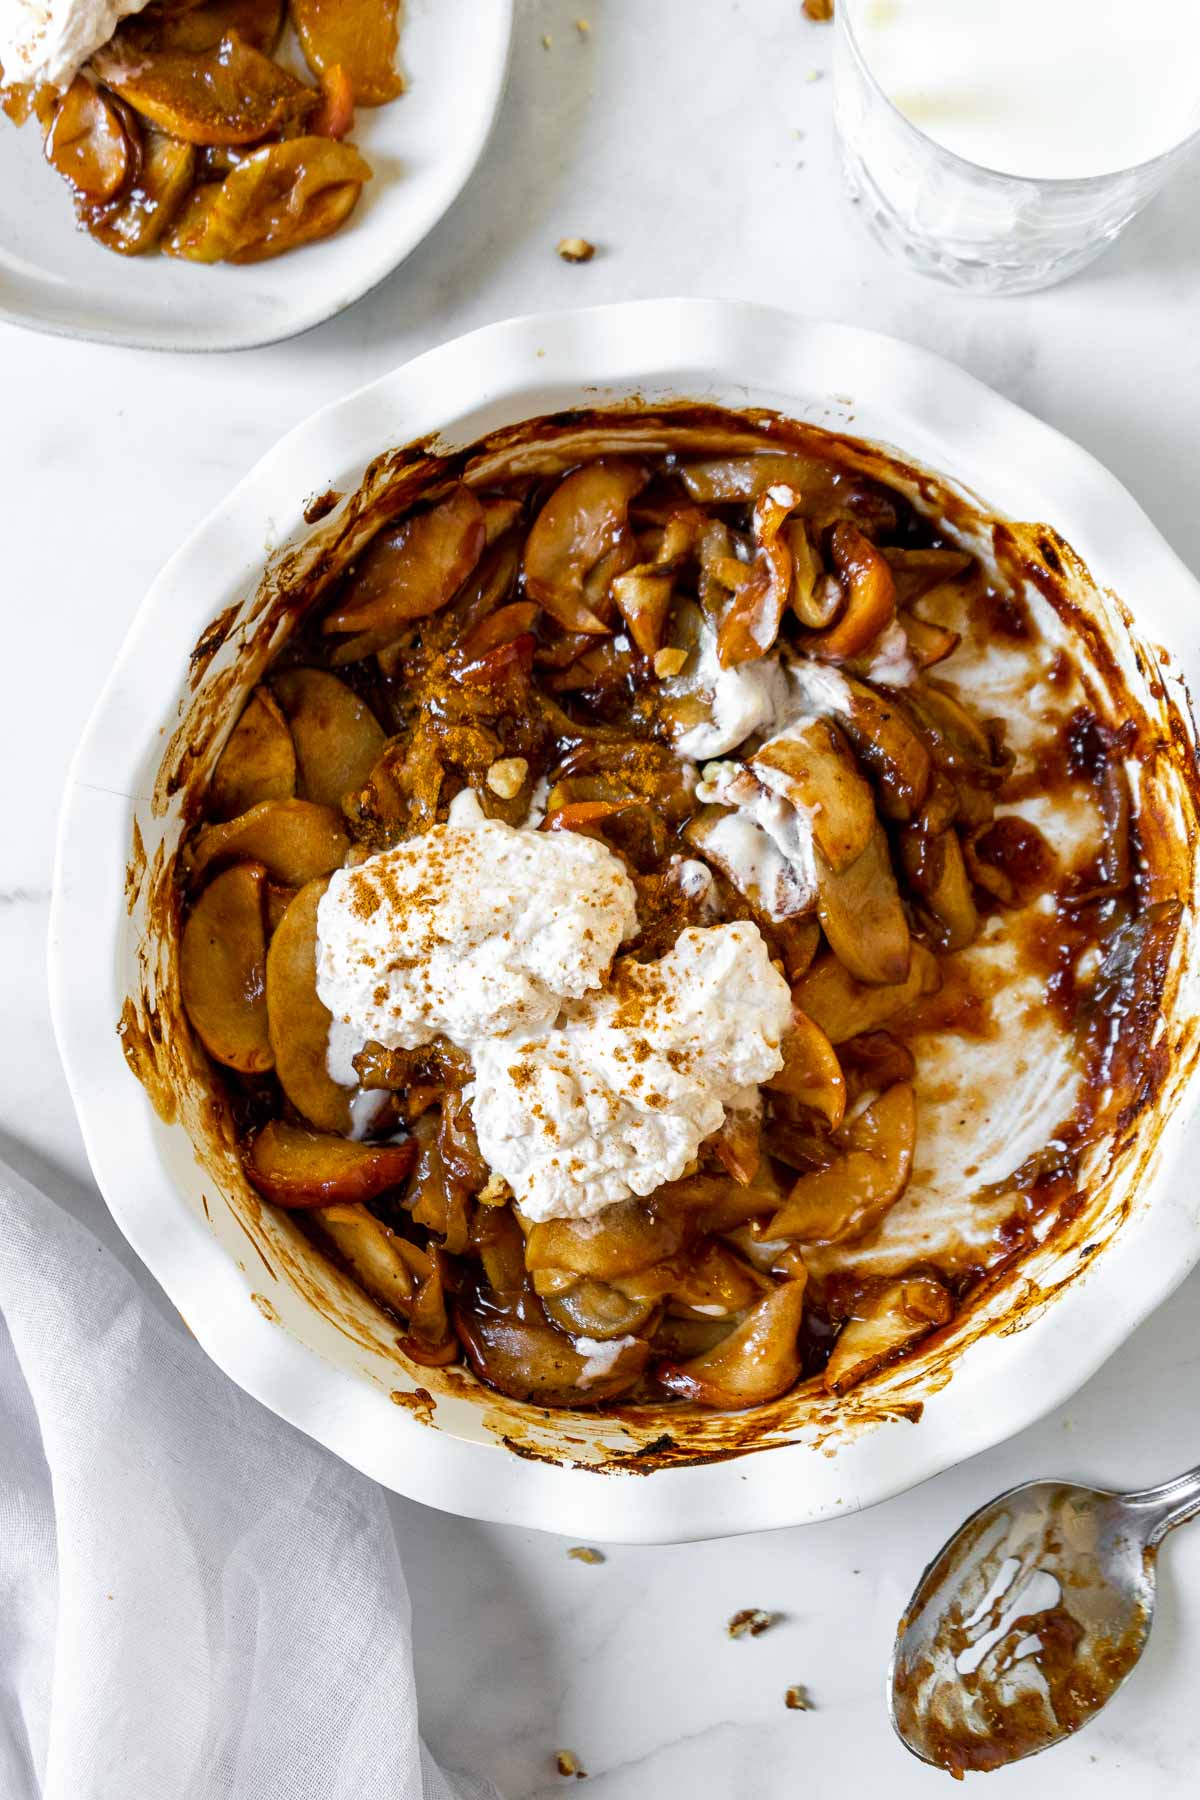 Air fryer baked apples in a large white baking dish topped with cinnamon whipped cream.